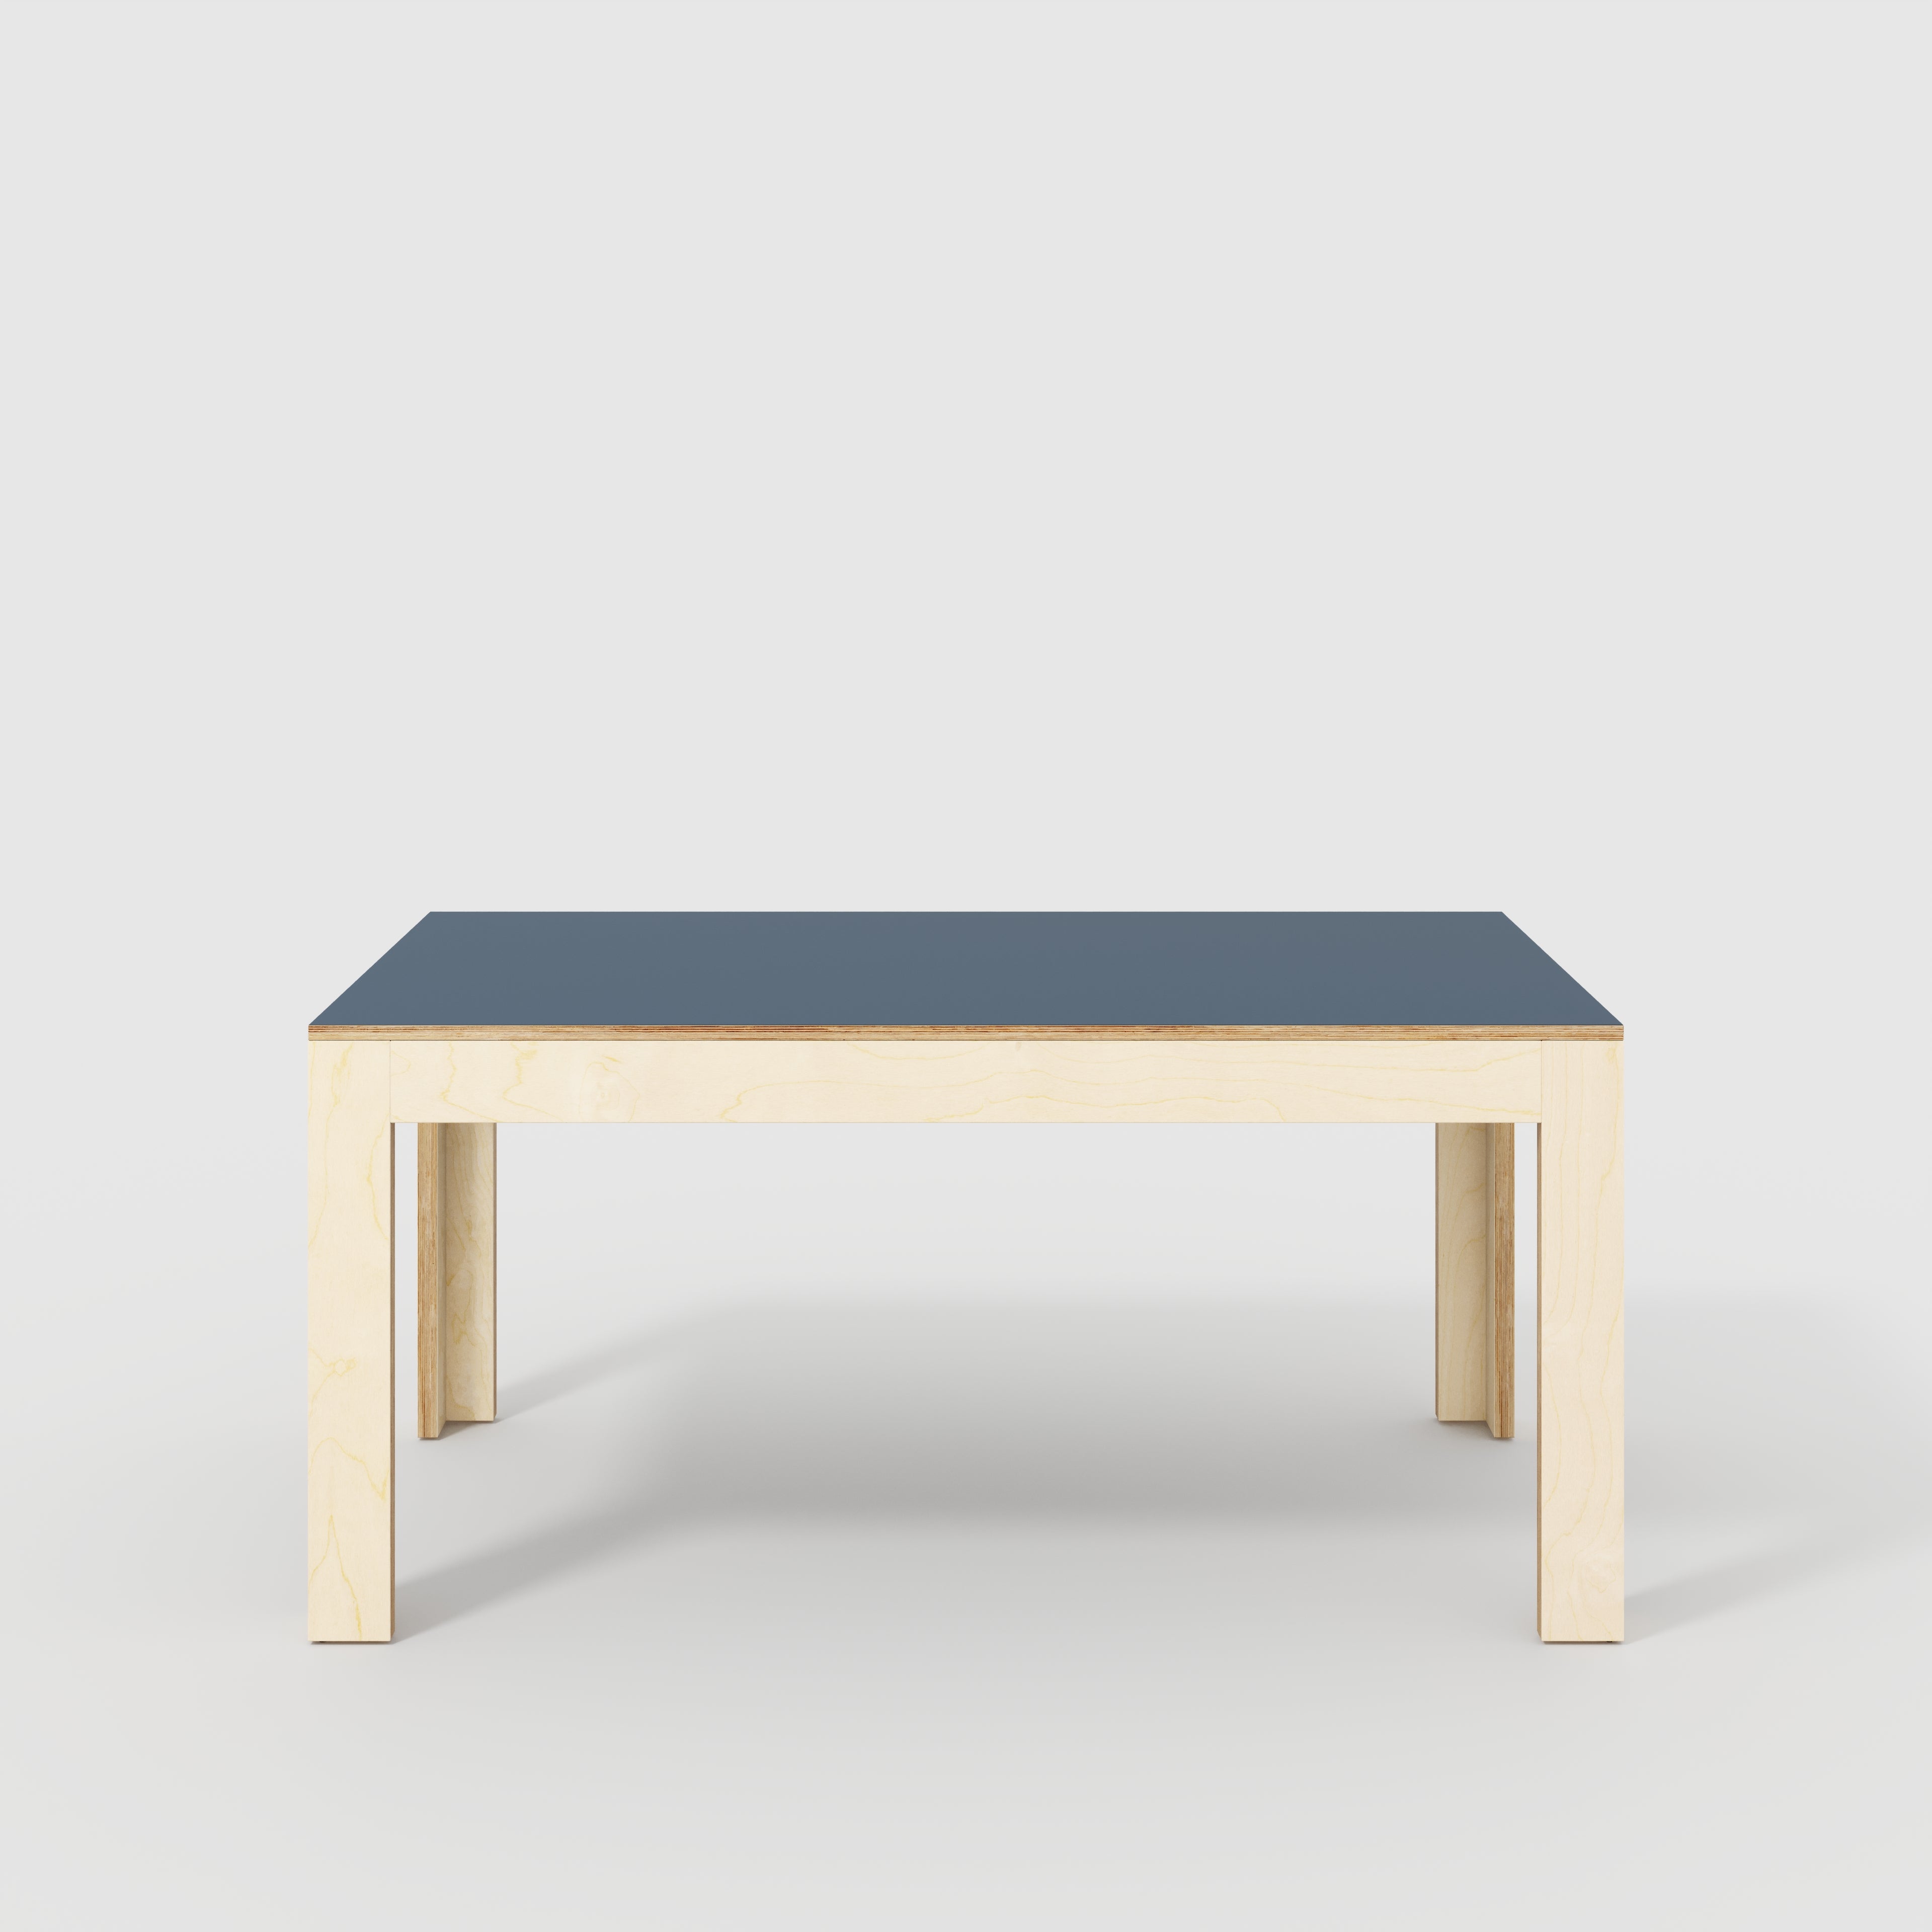 Table with Solid Frame - Formica Night Sea Blue - 1600(w) x 800(d)